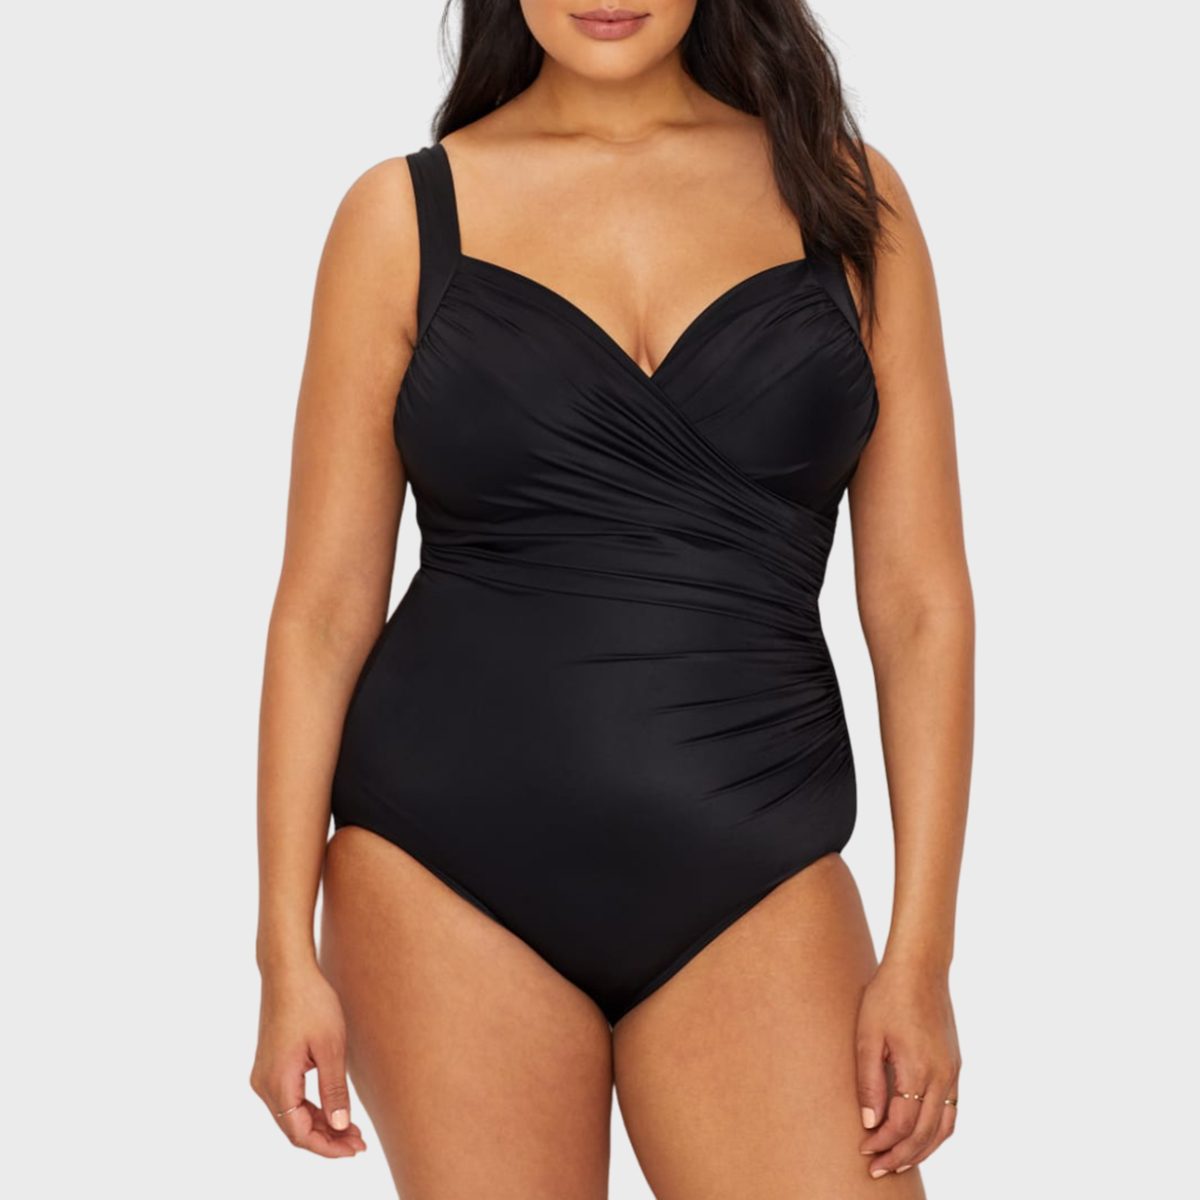 The Best Plus Size Swimsuits for Travel and Ocean Lovers - Eat